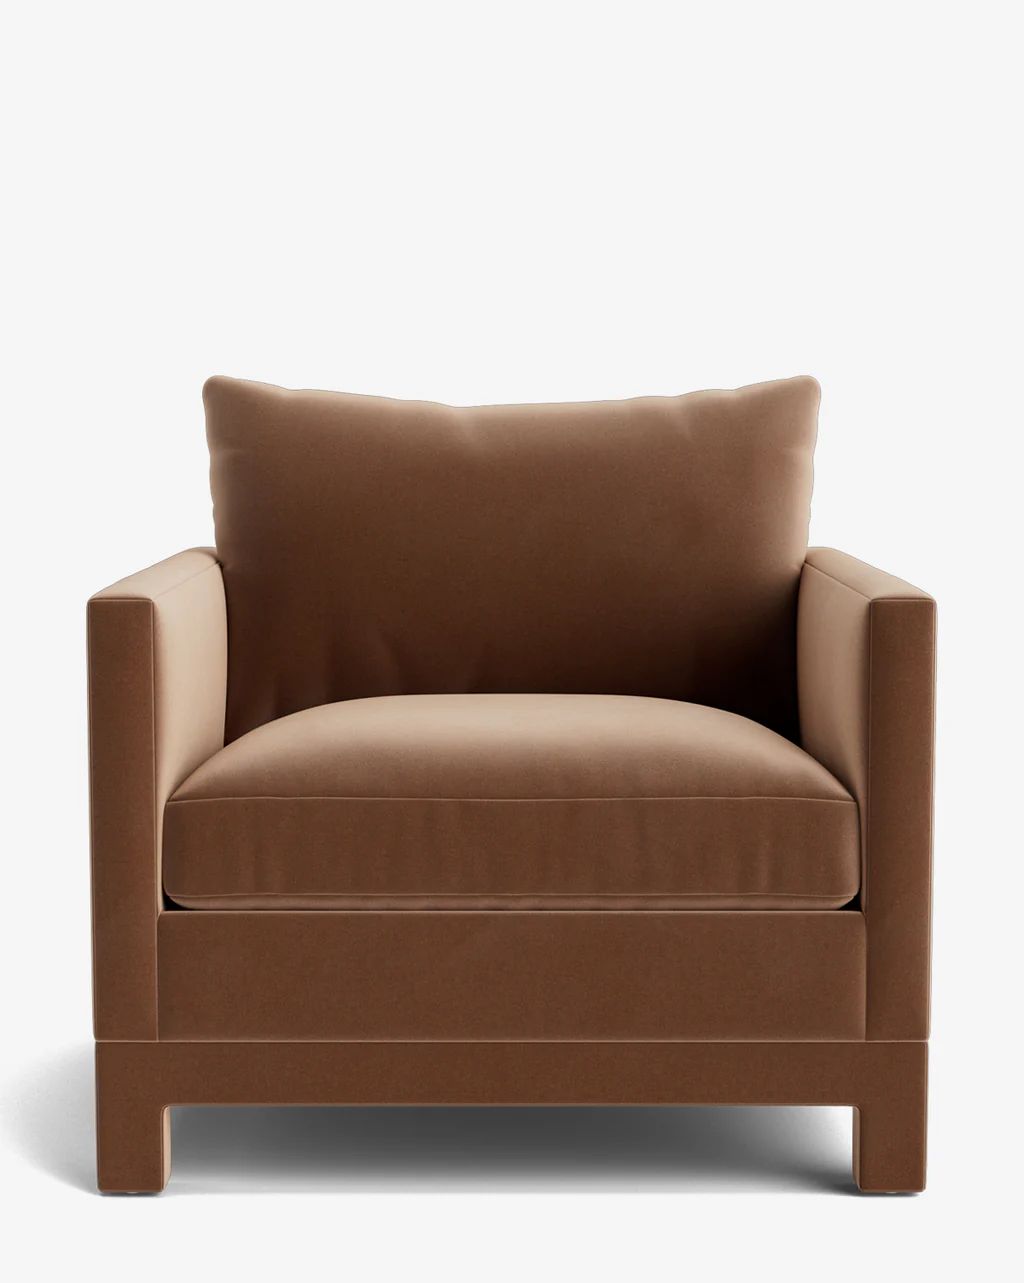 Appoline Chair | McGee & Co.